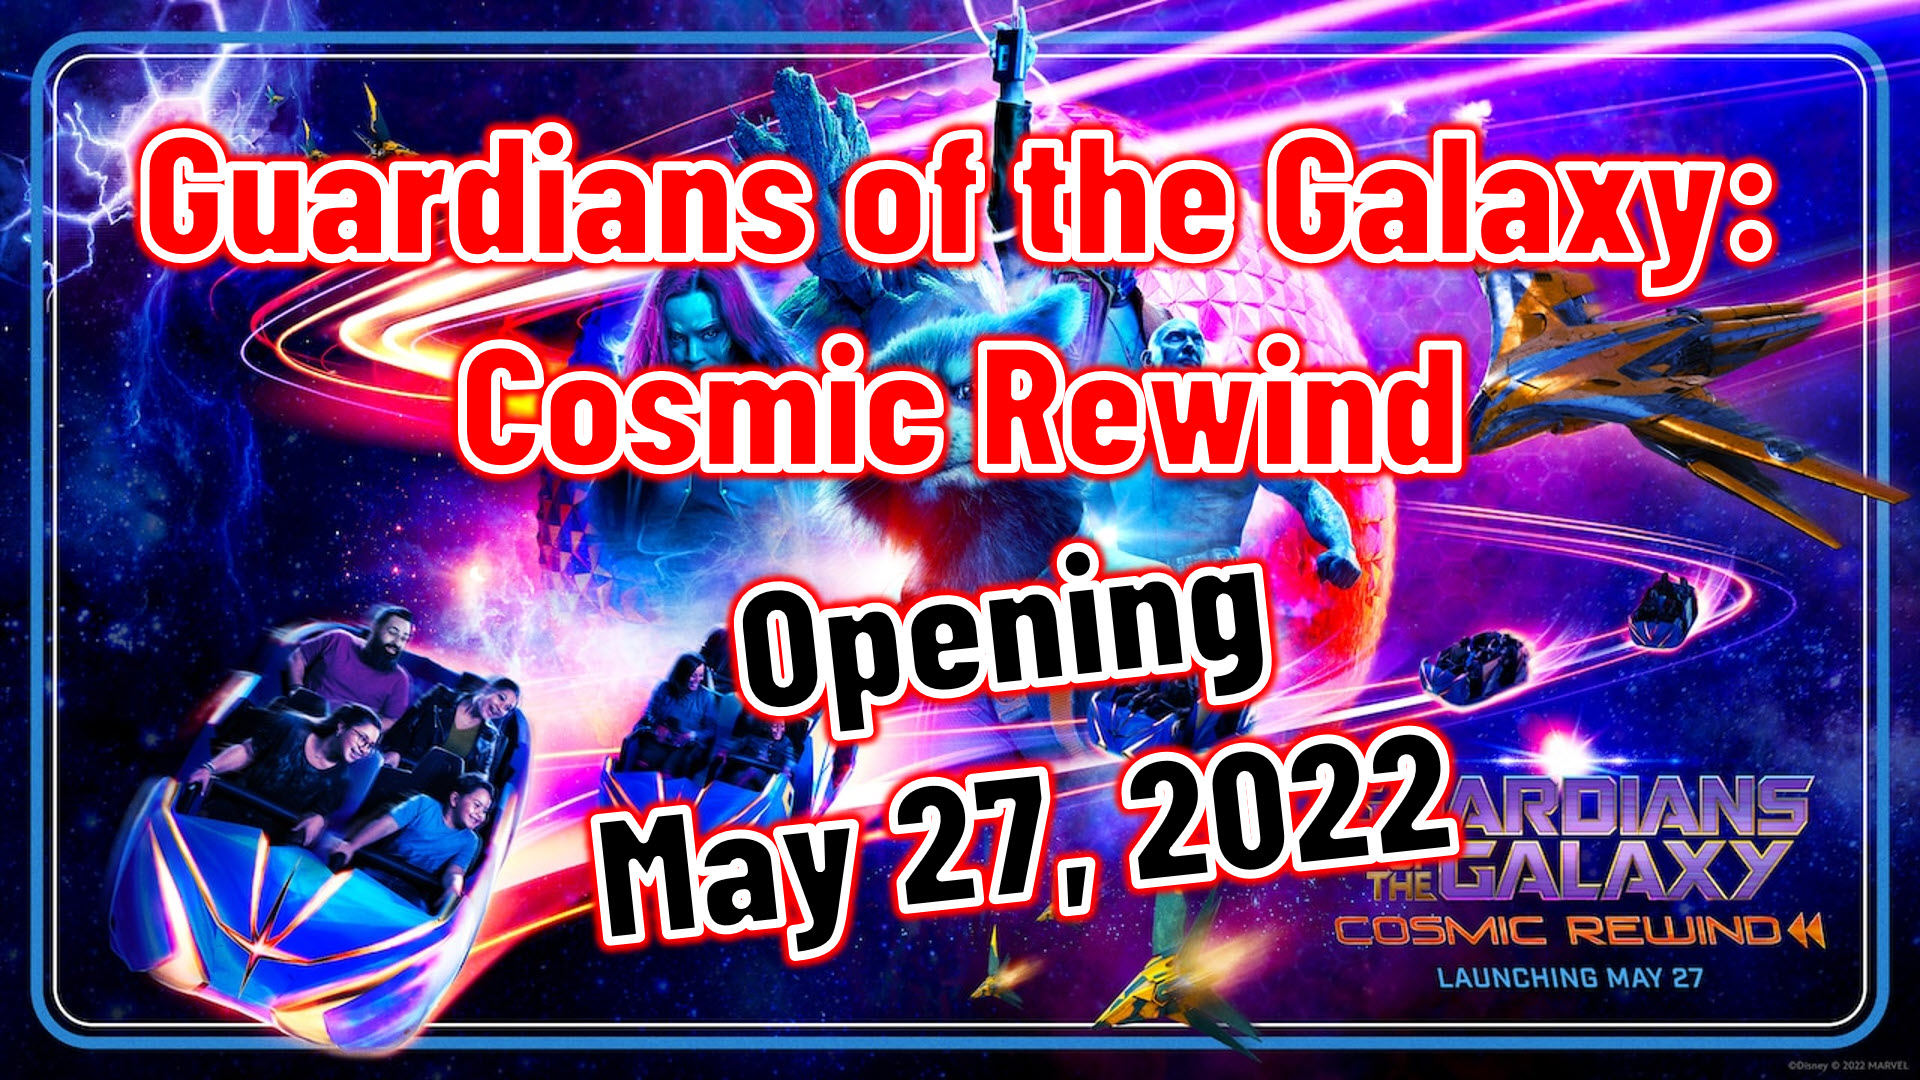 Guardians of the Galaxy: Cosmic Rewind Opens May 27, 2022 at Epcot